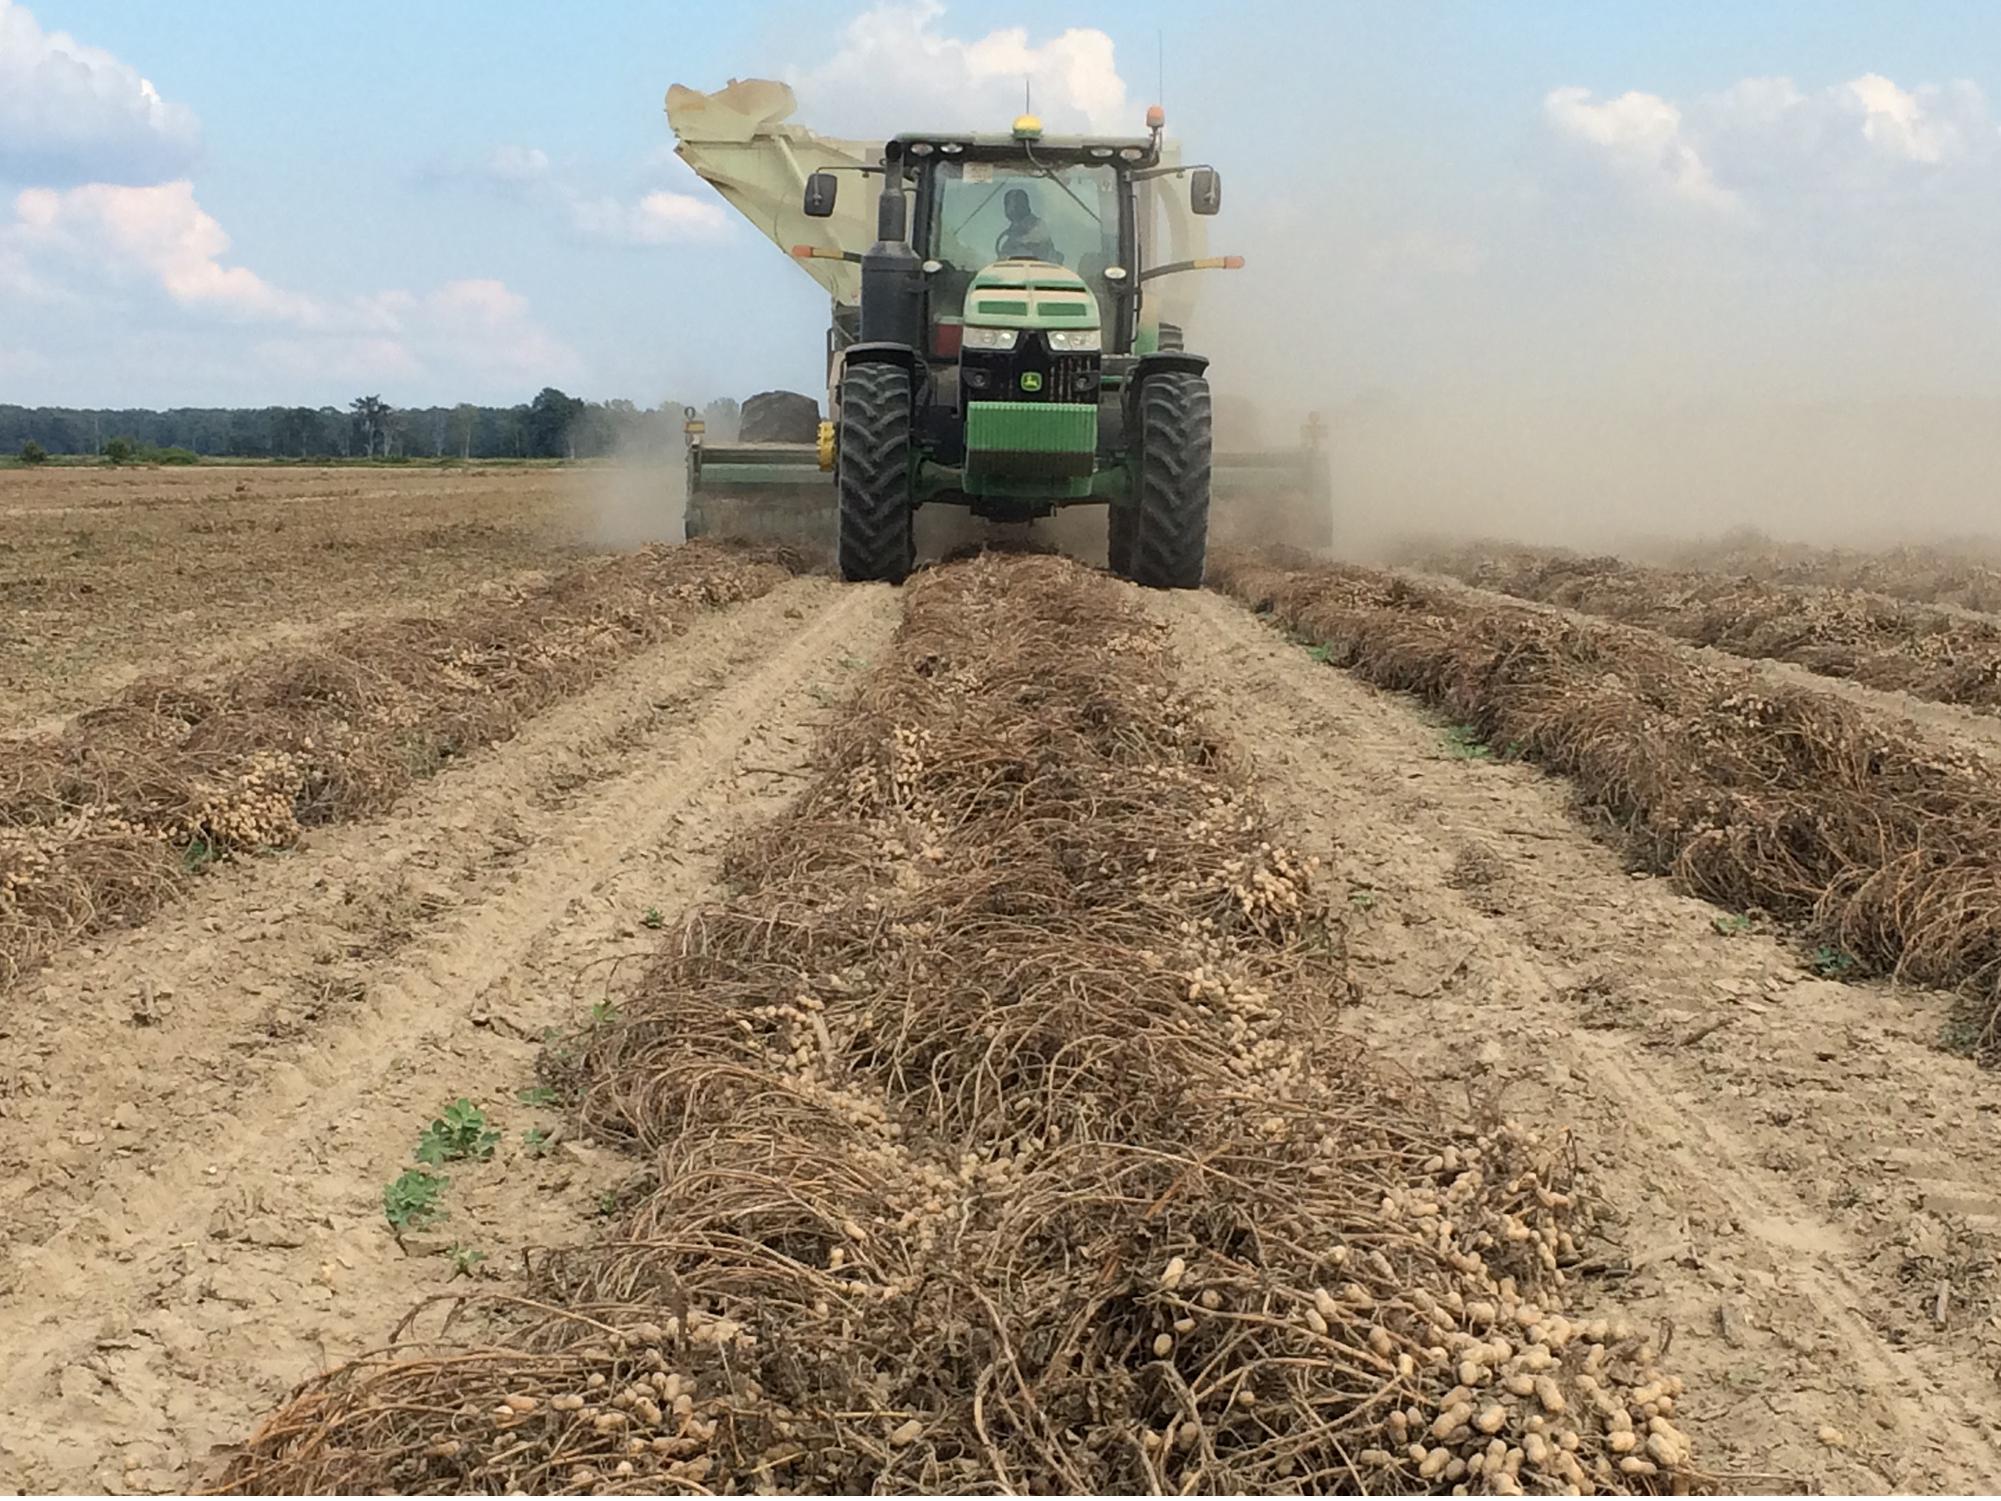 A green combine rolls through a peanut field. In the foreground, peanuts waiting to be harvested rest on the ground.